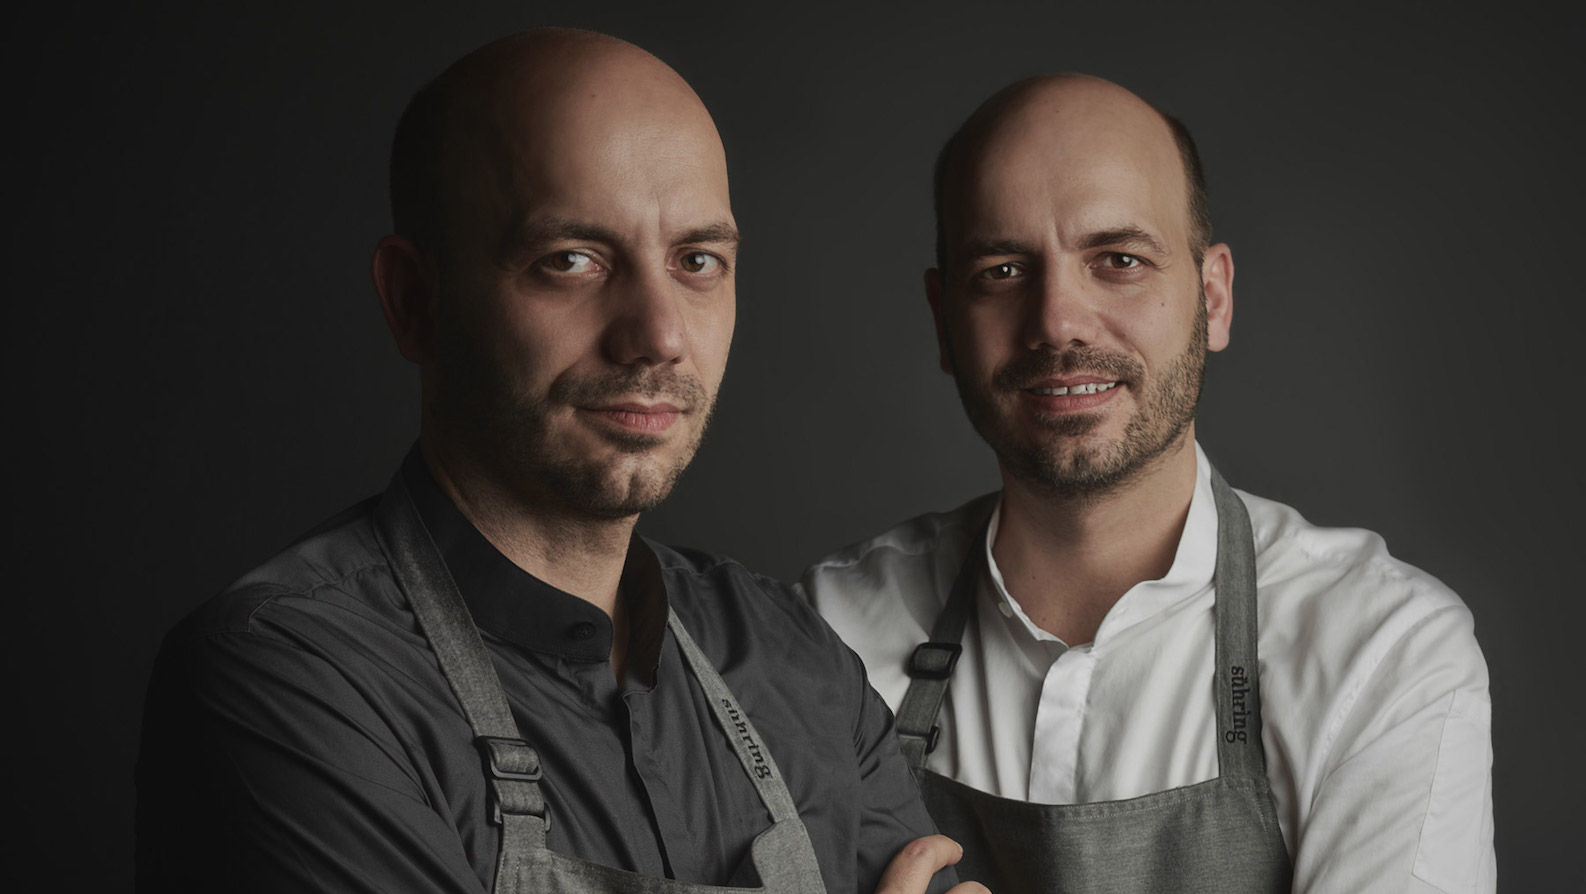 One of the world's best restaurants, Sühring, will pop-up in Hong Kong ...